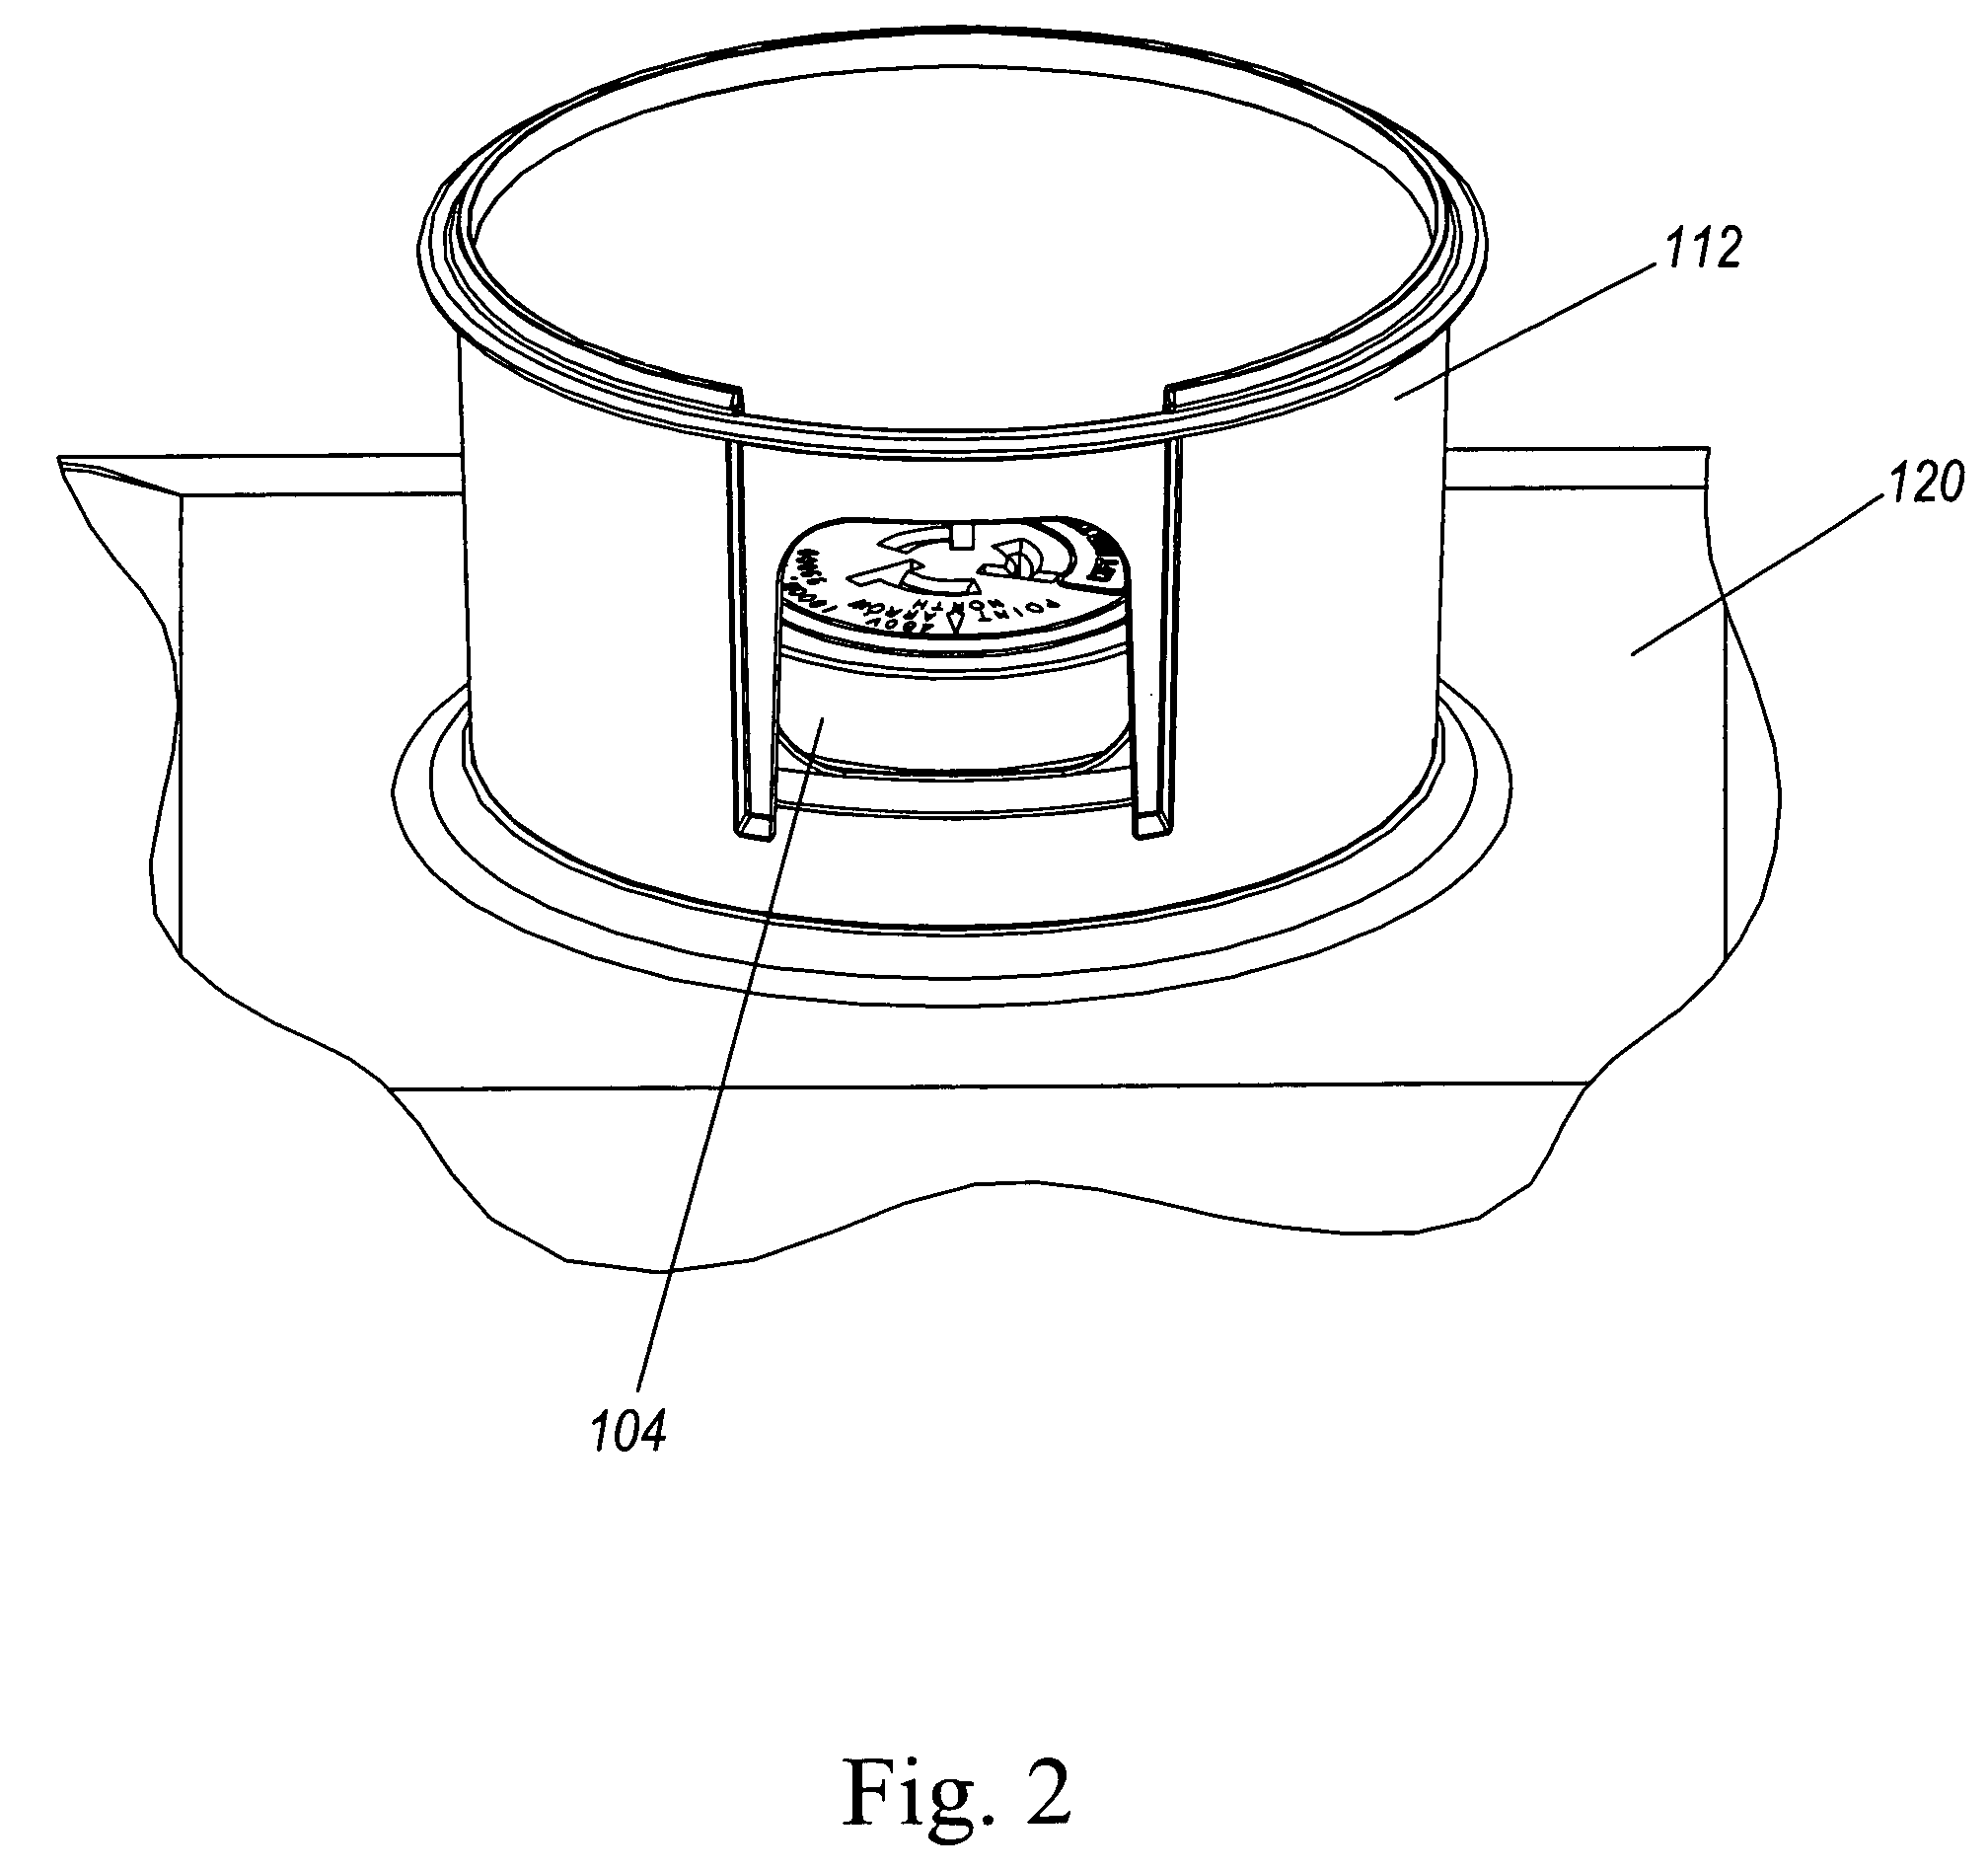 Toolessly adjustable cupola and photocontrol receptacle assembly